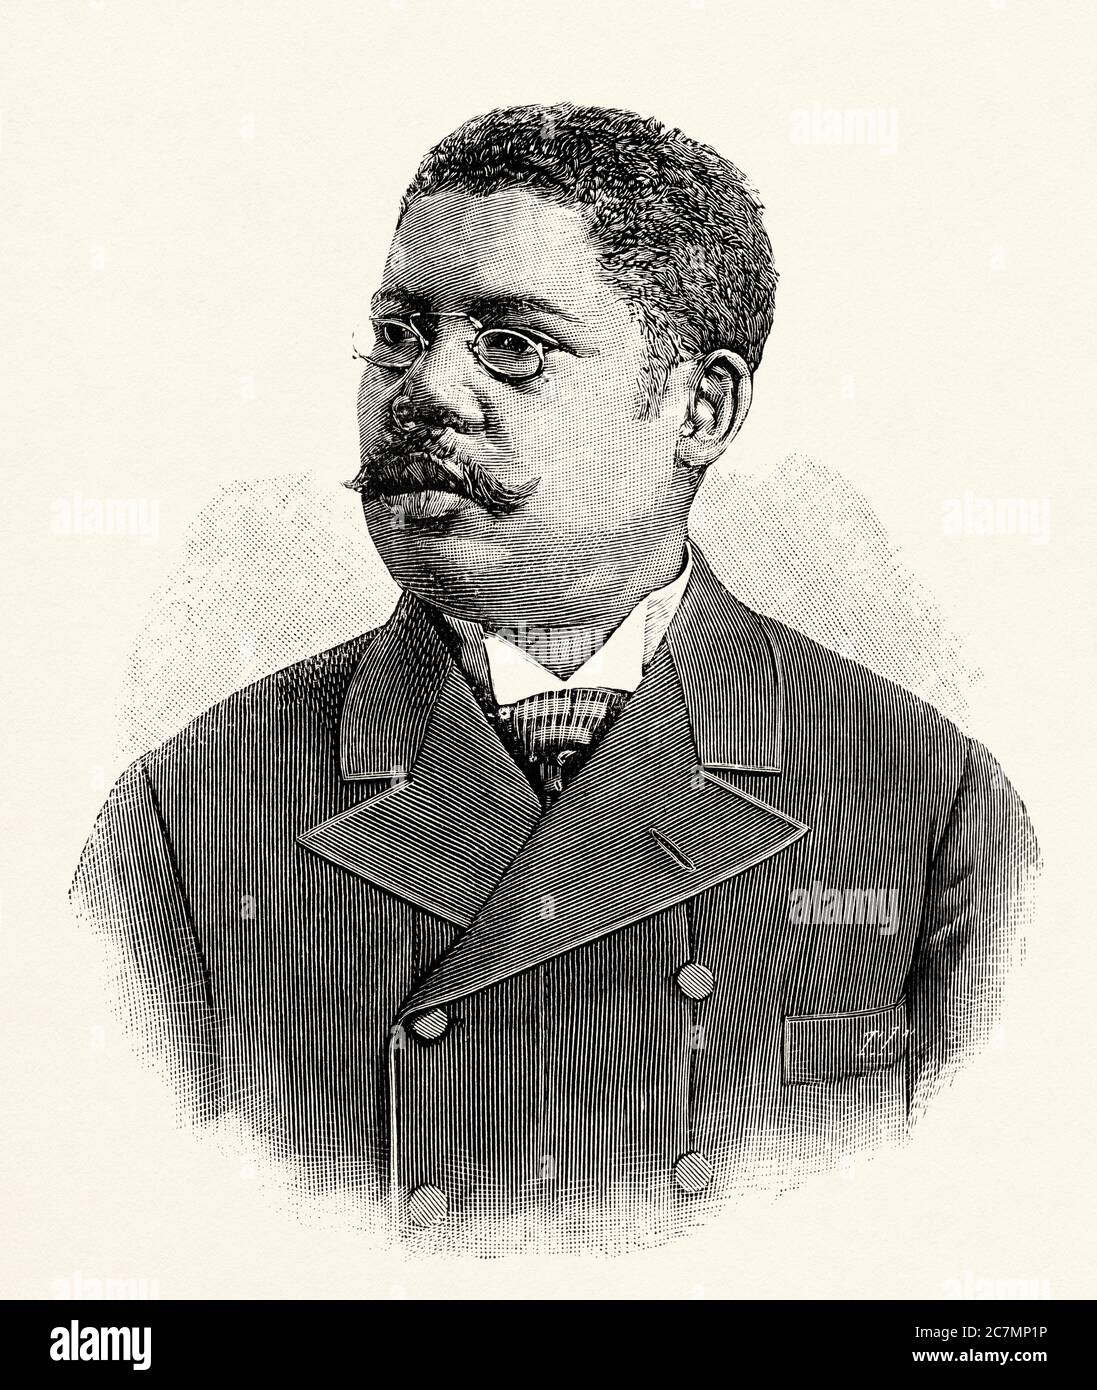 Revolutionary chiefs in Cuba. Juan Gualberto Gómez Ferrer (1854 -1933) was a patriotic politician, journalist, and leader of African-American Cubans, who excelled in the fight for Cuban independence and during the republican period between 1901 and 1933. Cuba. From La Ilustracion Española y Americana 1895 Stock Photo